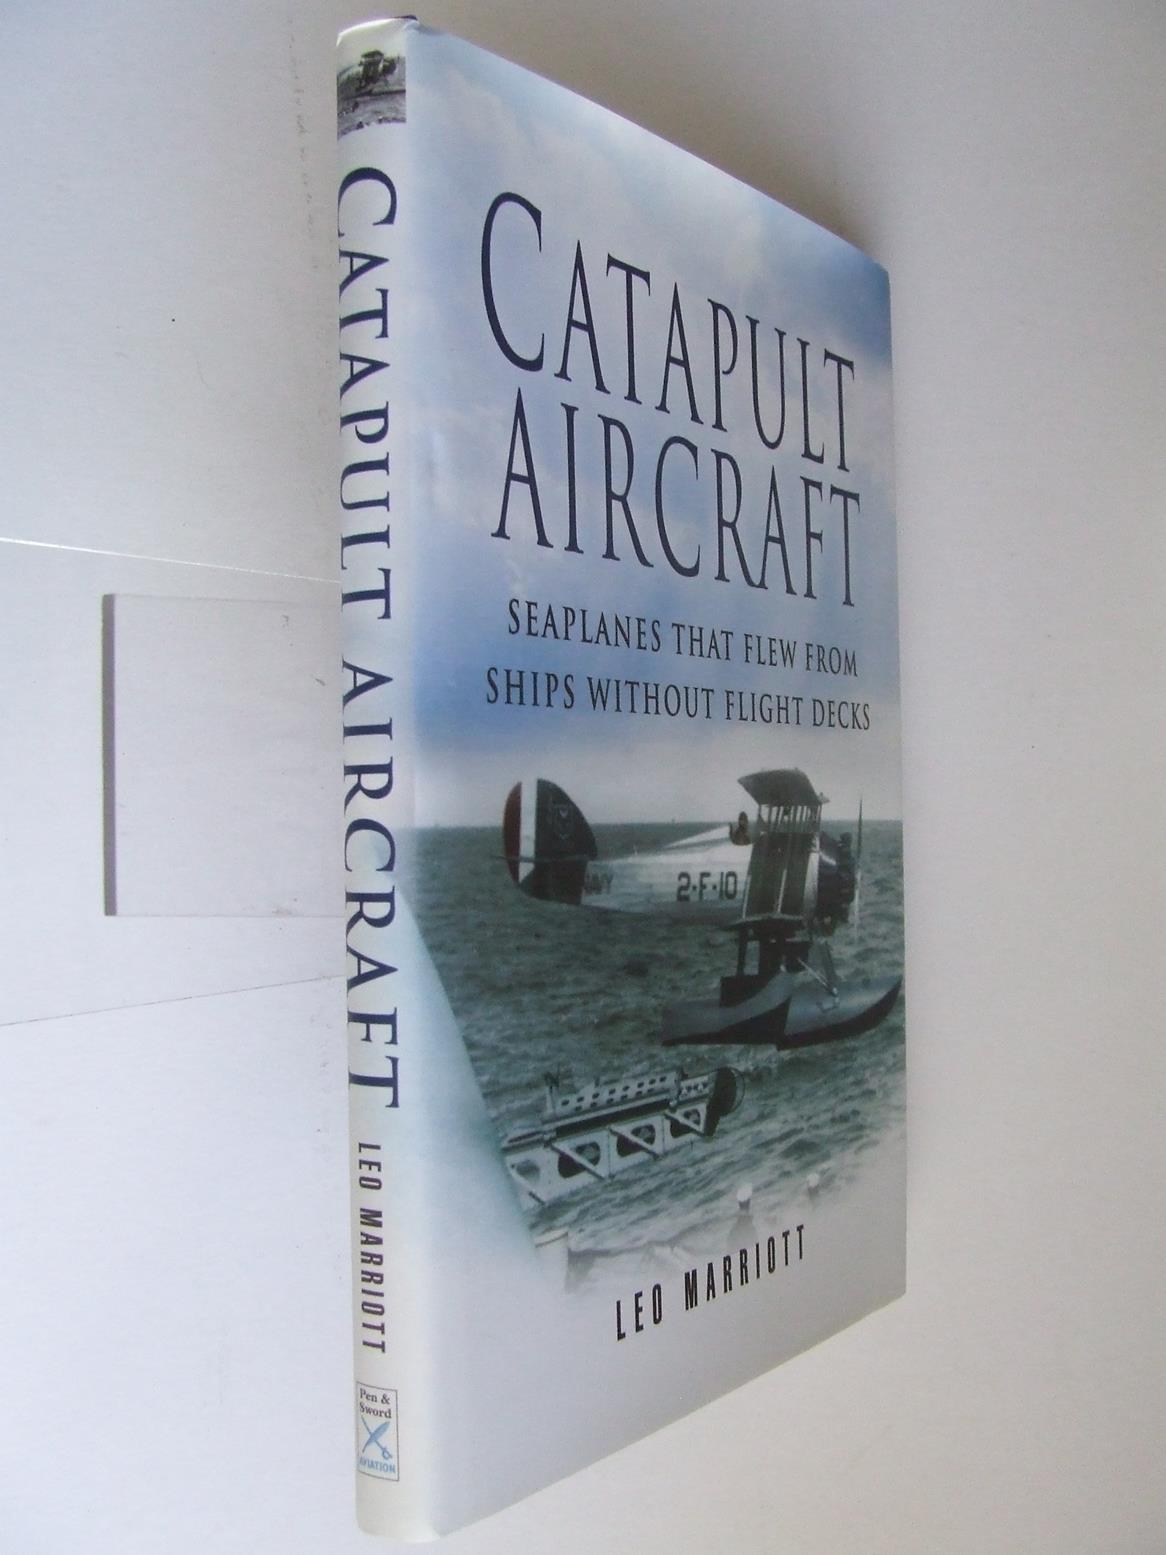 Catapult Aircraft, seaplanes that flew from ships without flight decks